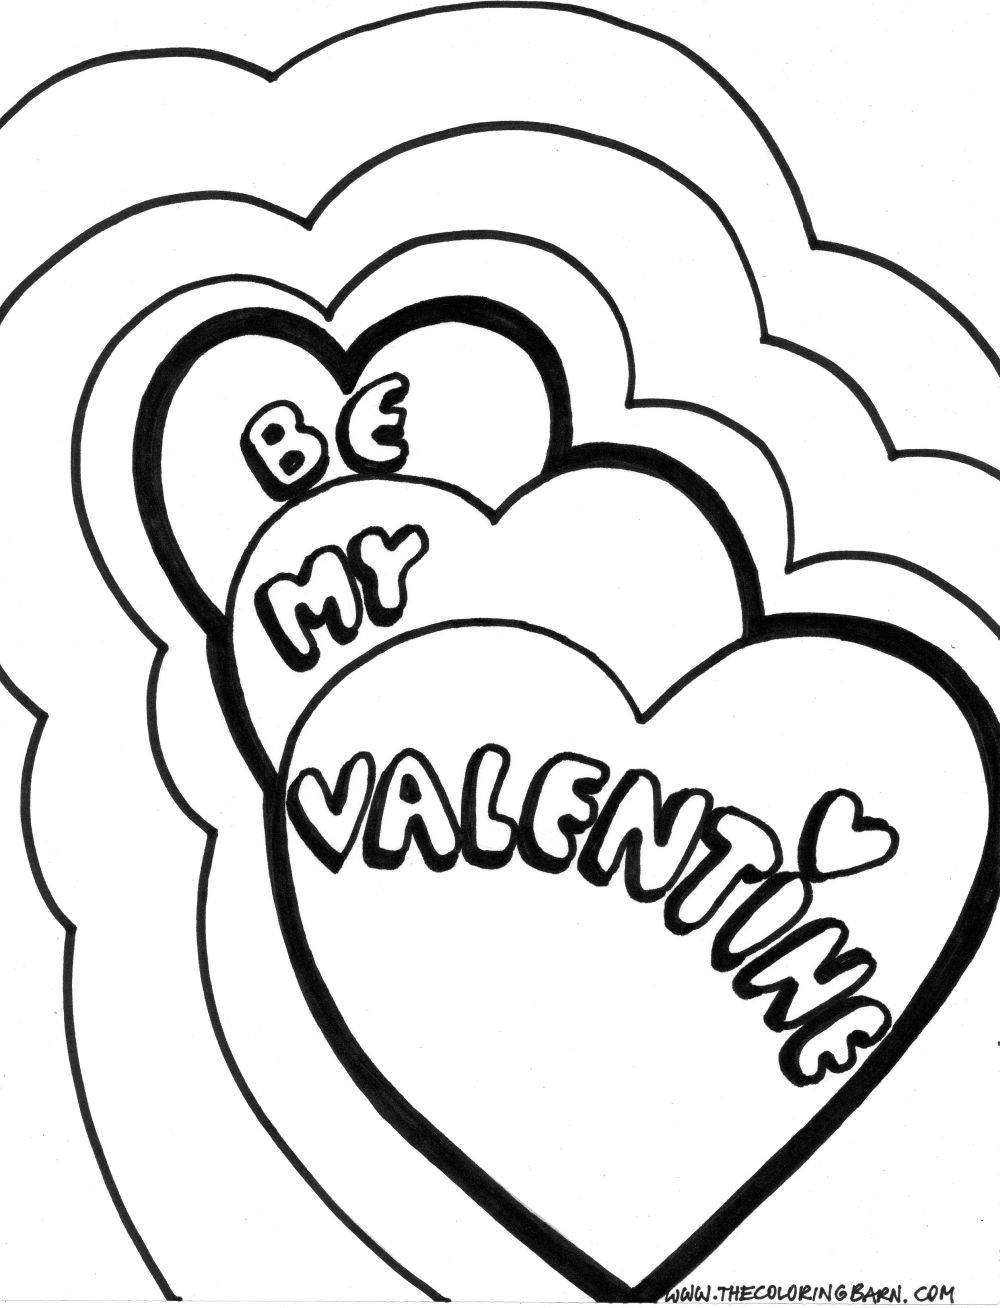 coloriage-happy-valentines-day-letters-with-hearts-dessin-st-valentin